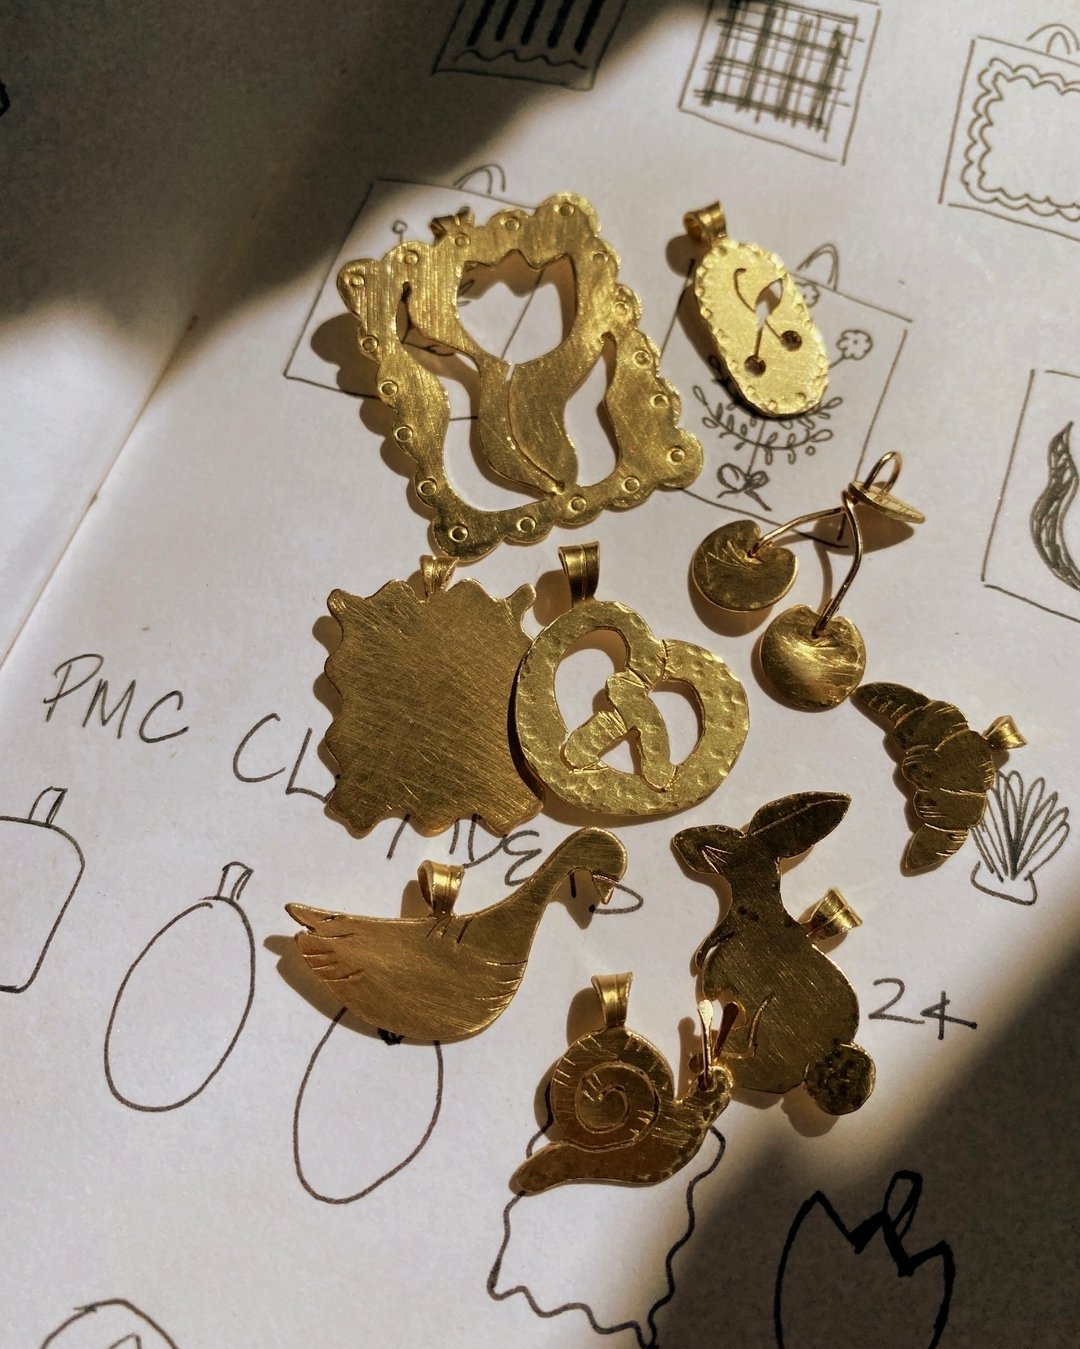 ✨The charm collection is coming along. I keep getting more and more ideas, it&rsquo;s kind of hard to stop! I&rsquo;m working with a laser cutter to help me cut the blanks so I can do all the stamping and details by hand. It&rsquo;s a real bummer I c